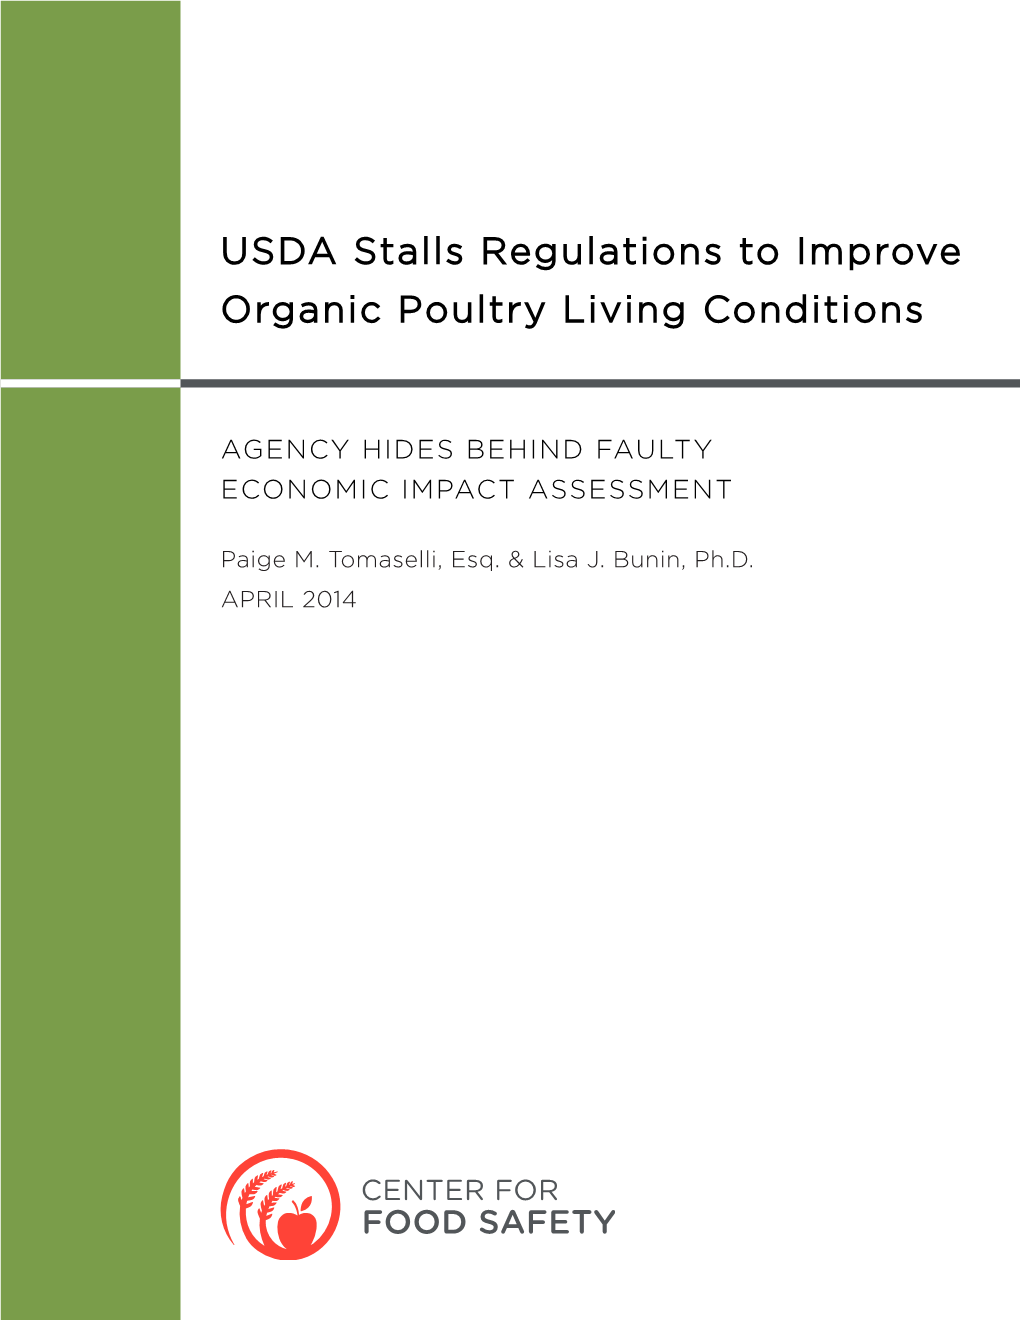 USDA Stalls Regulations to Improve Organic Poultry Living Conditions